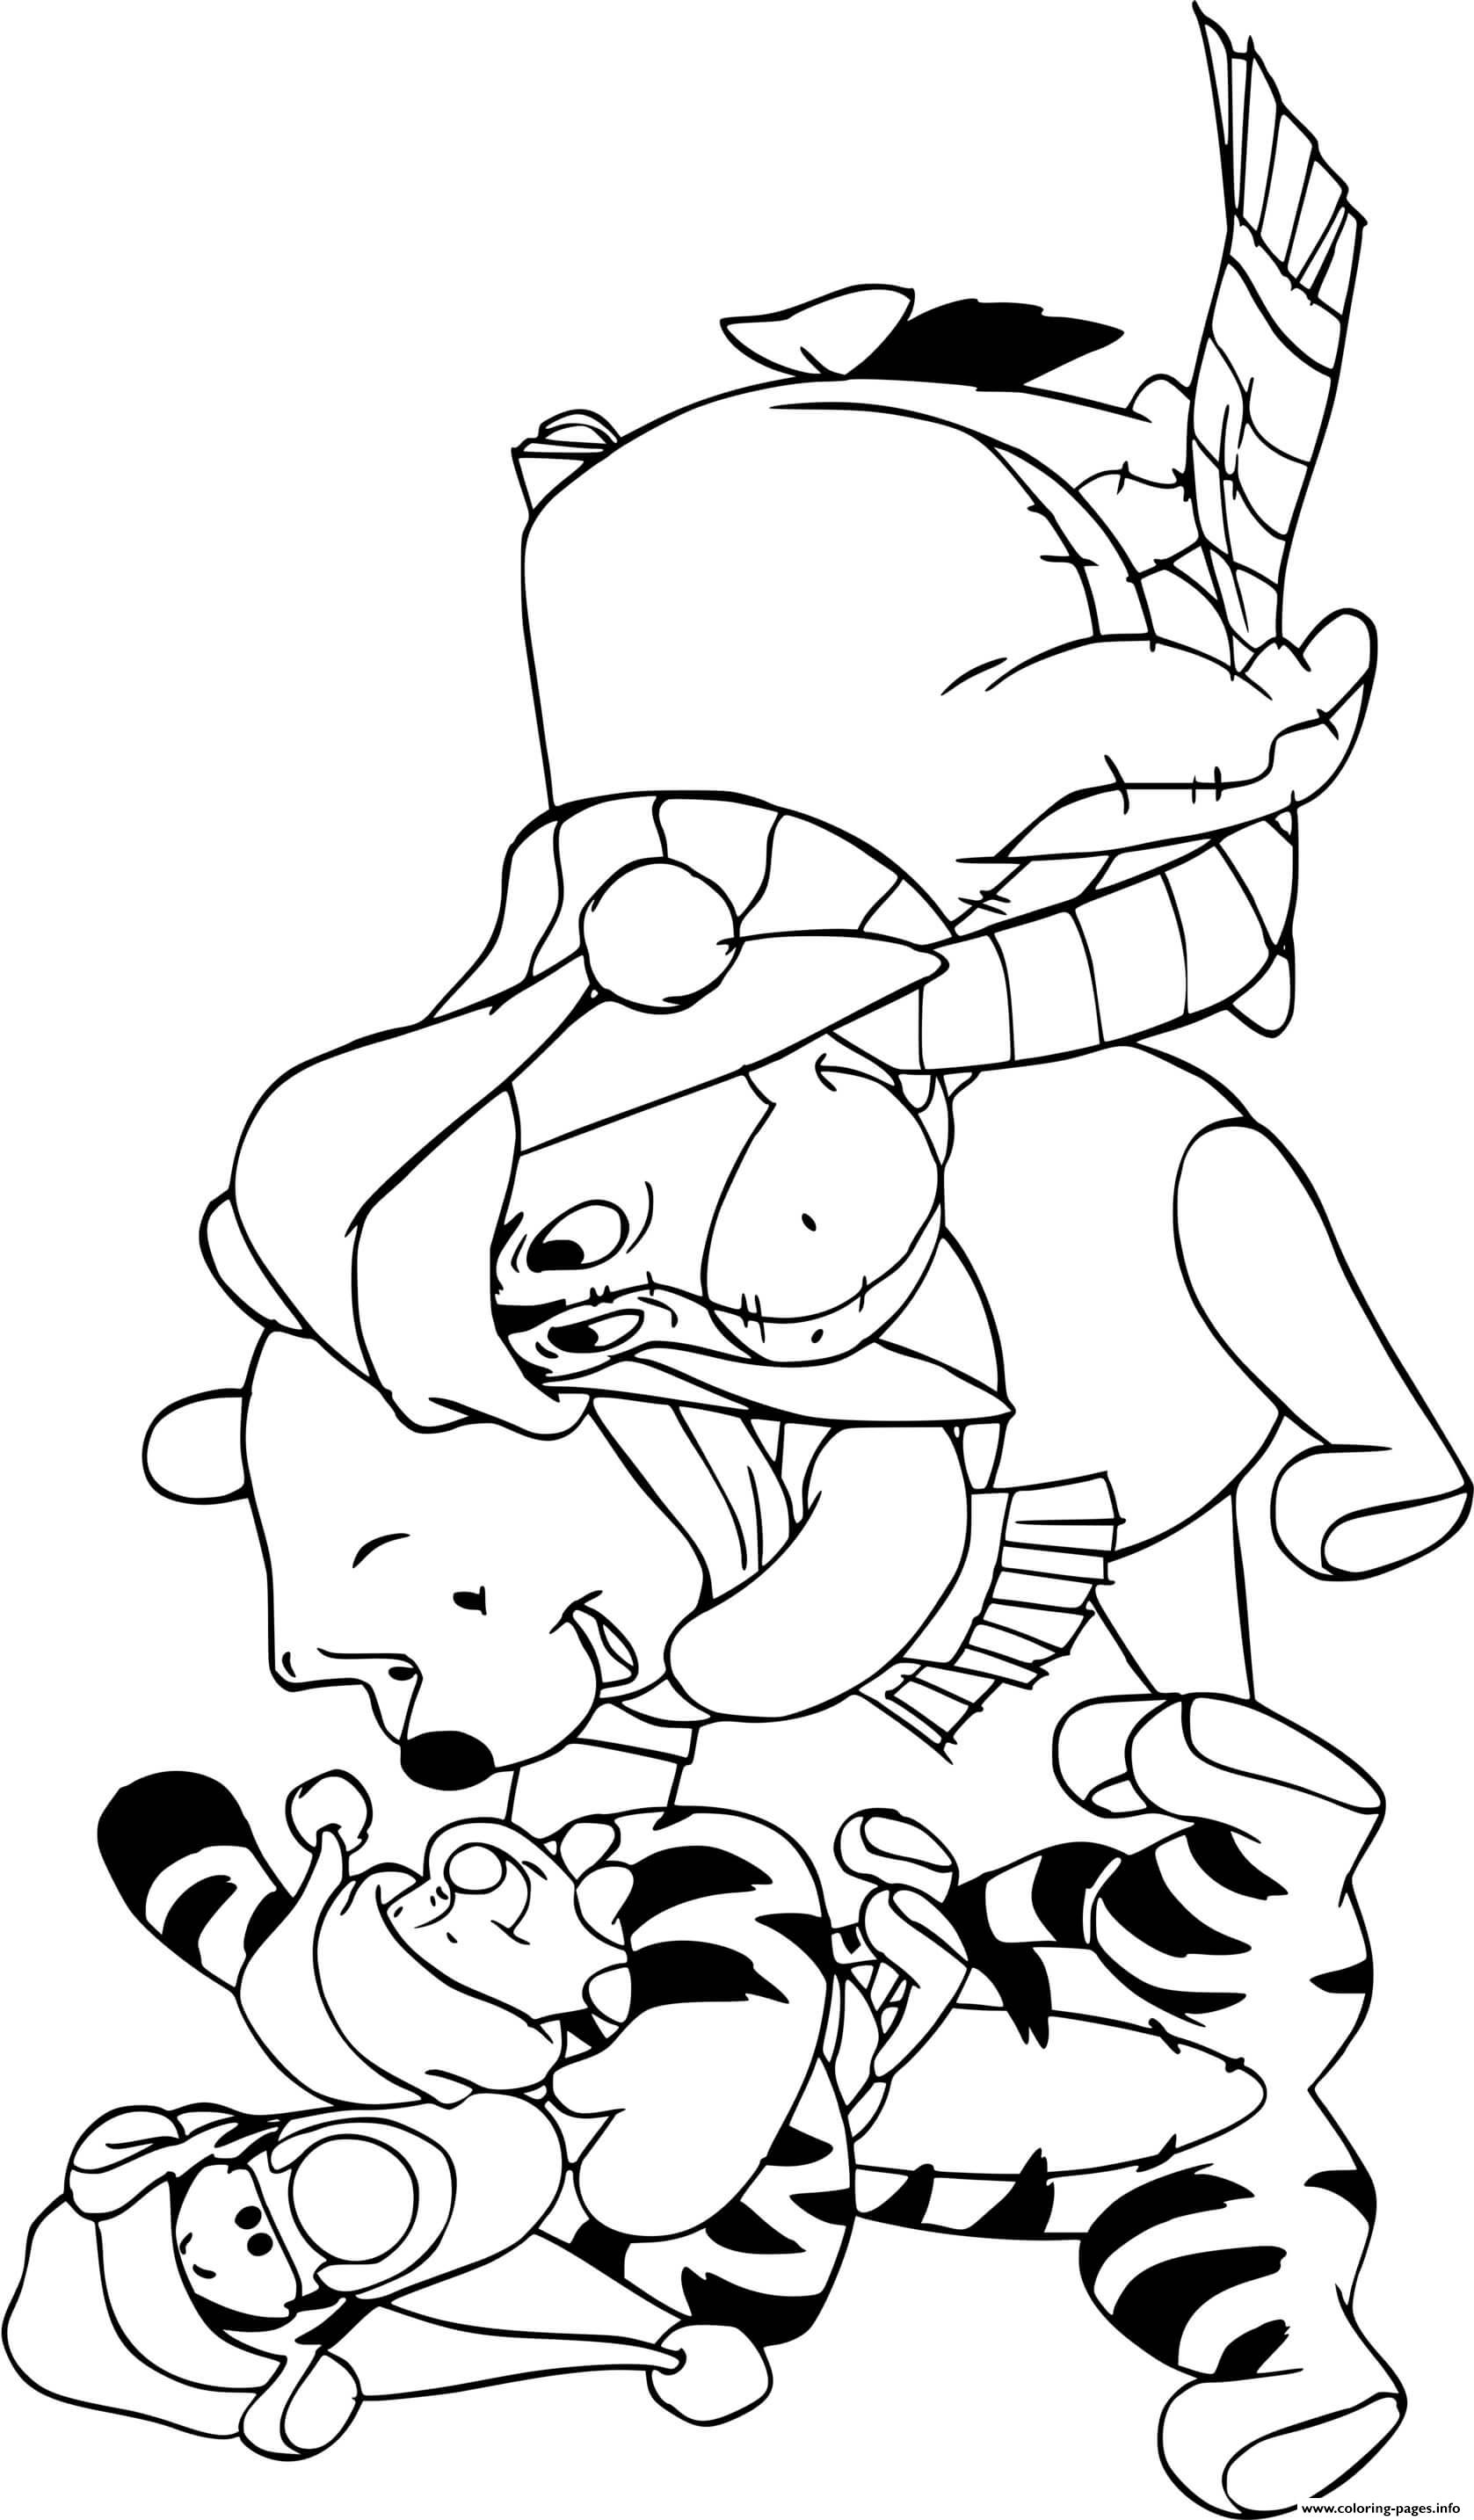 Winnie The Pooh And Friends coloring